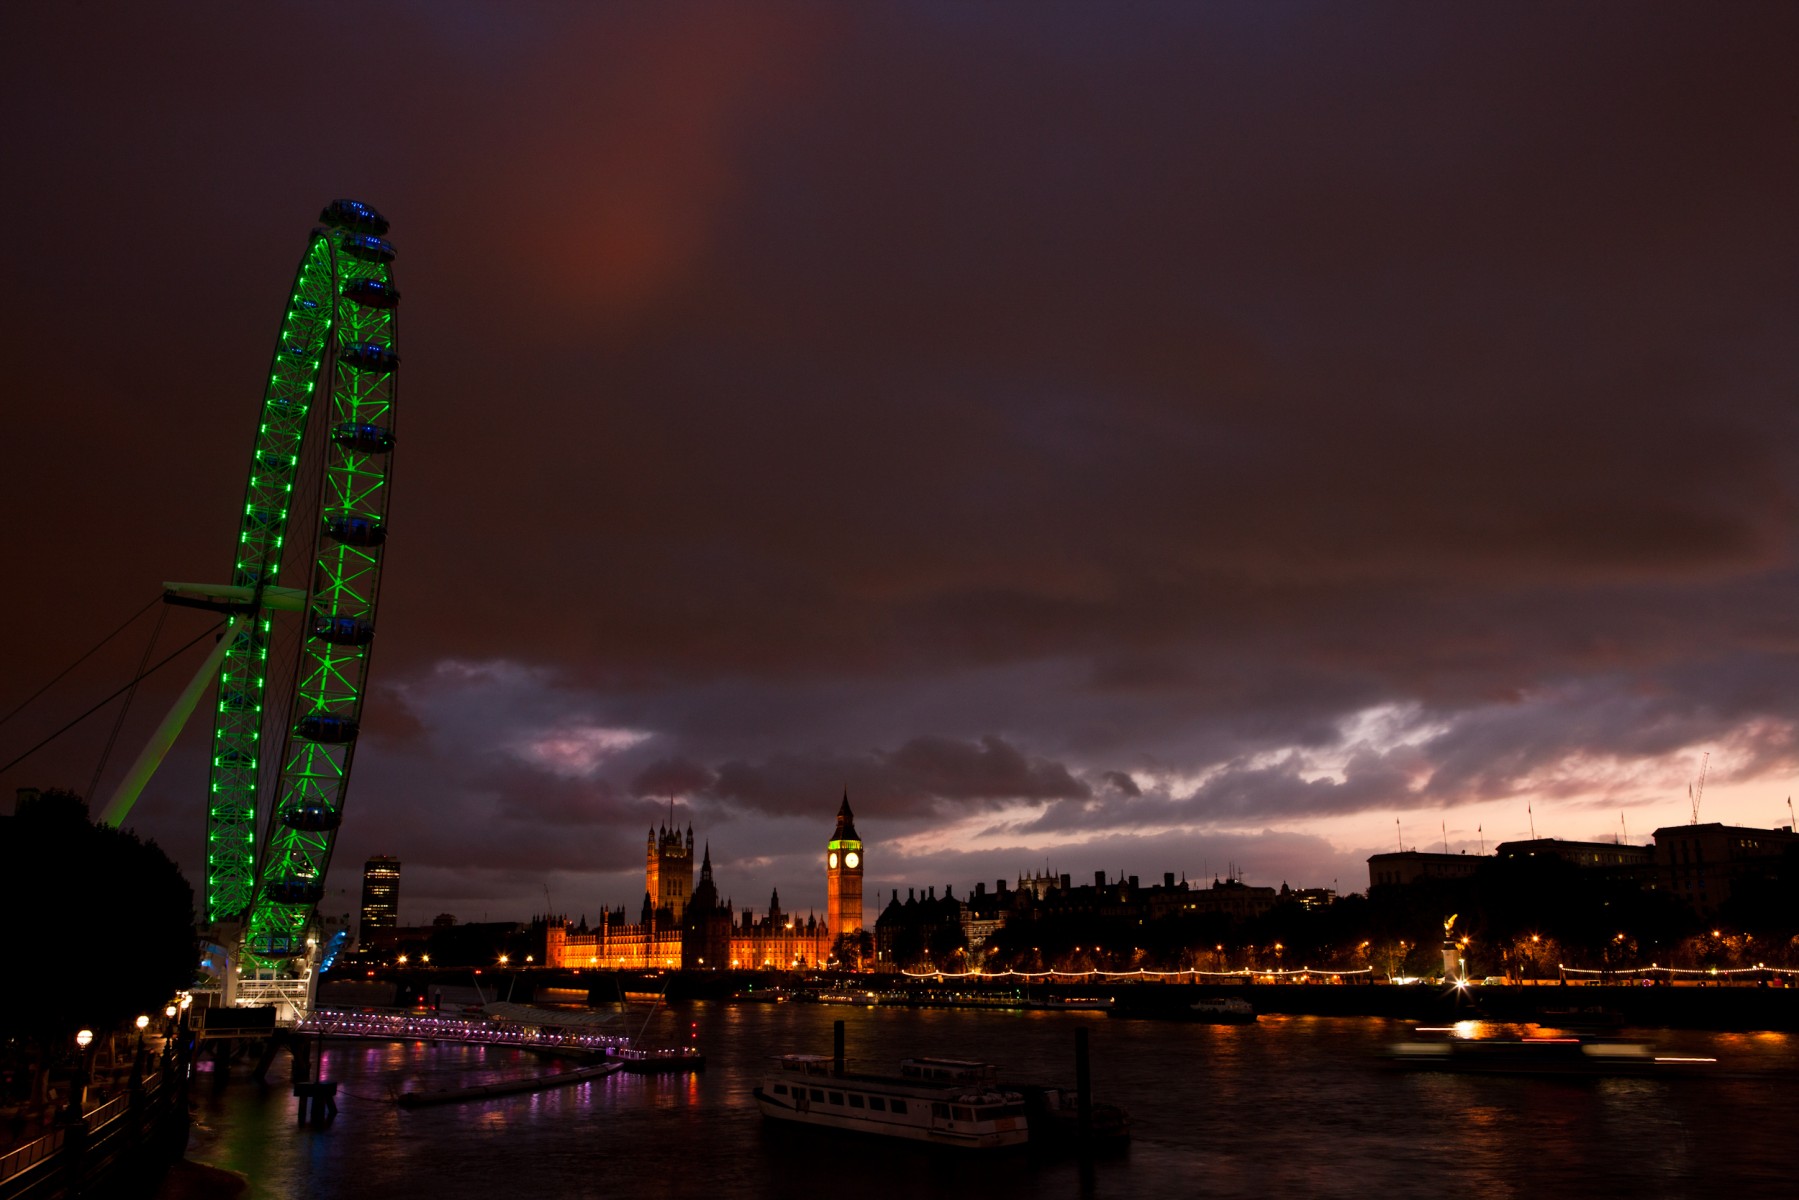 London Eye and the Palace of Westminster